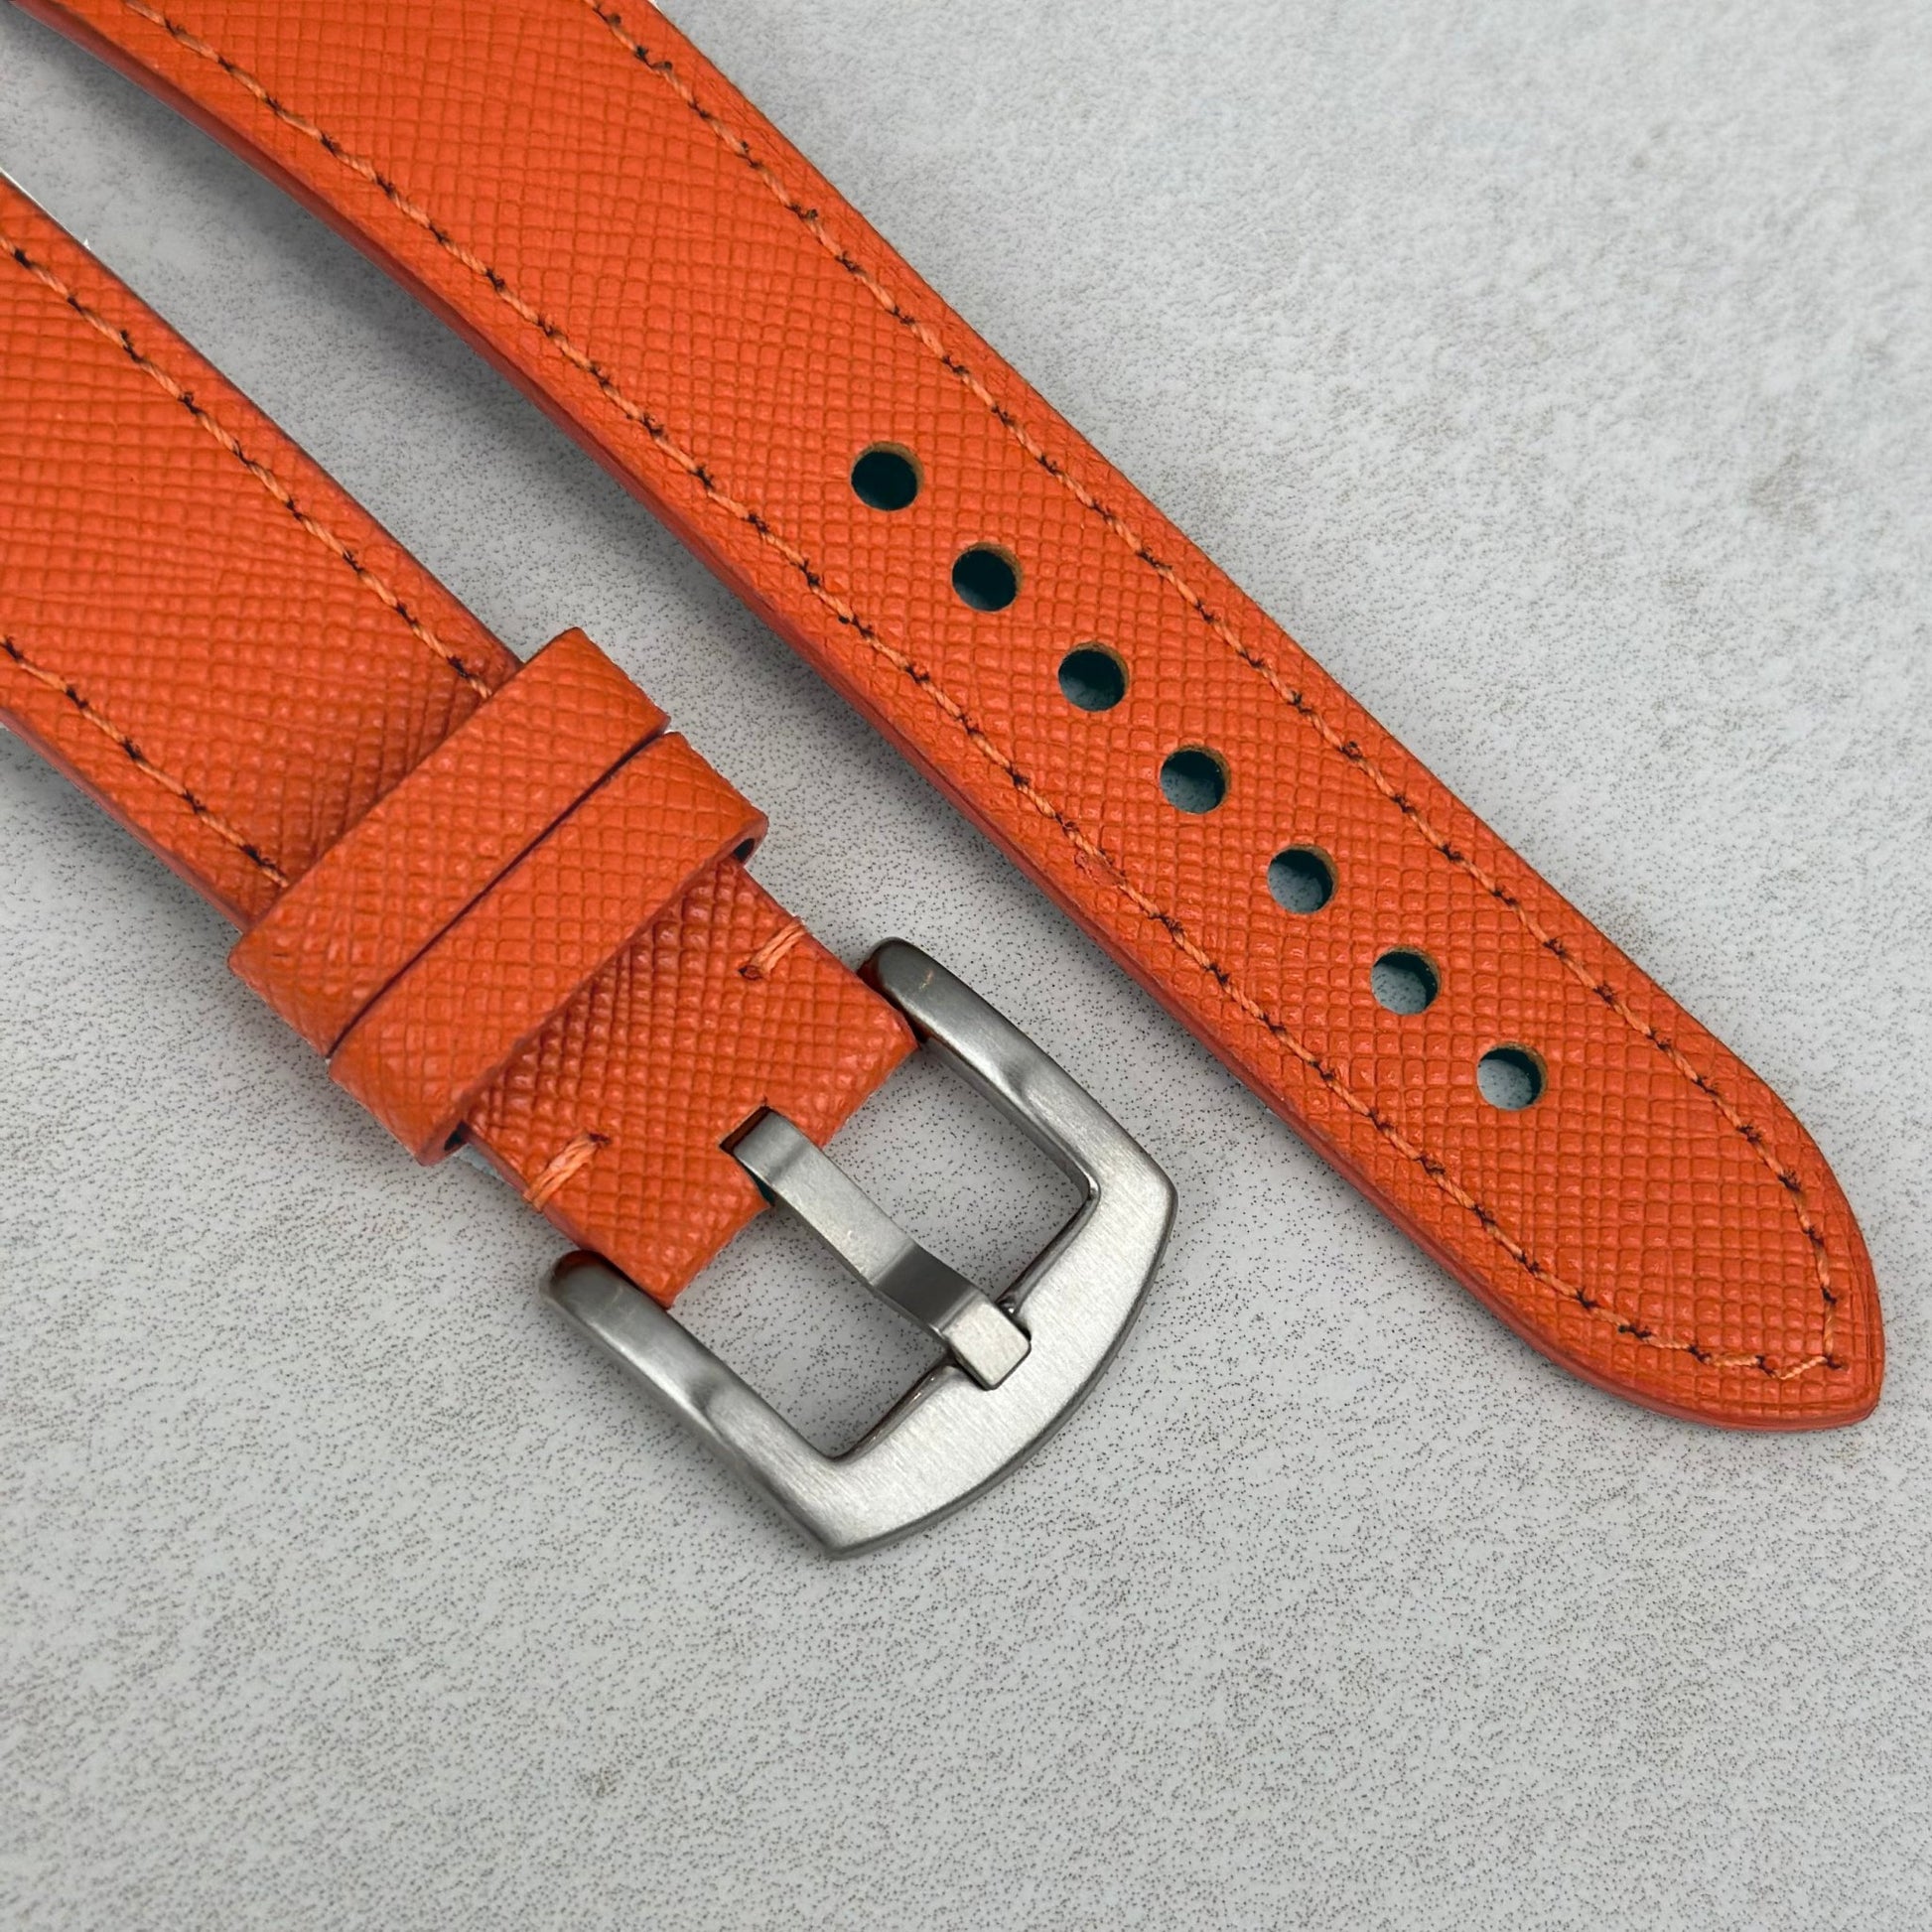 Brushed 316L stainless steel buckle on the Florence Saffiano leather watch strap. Watch And Strap.